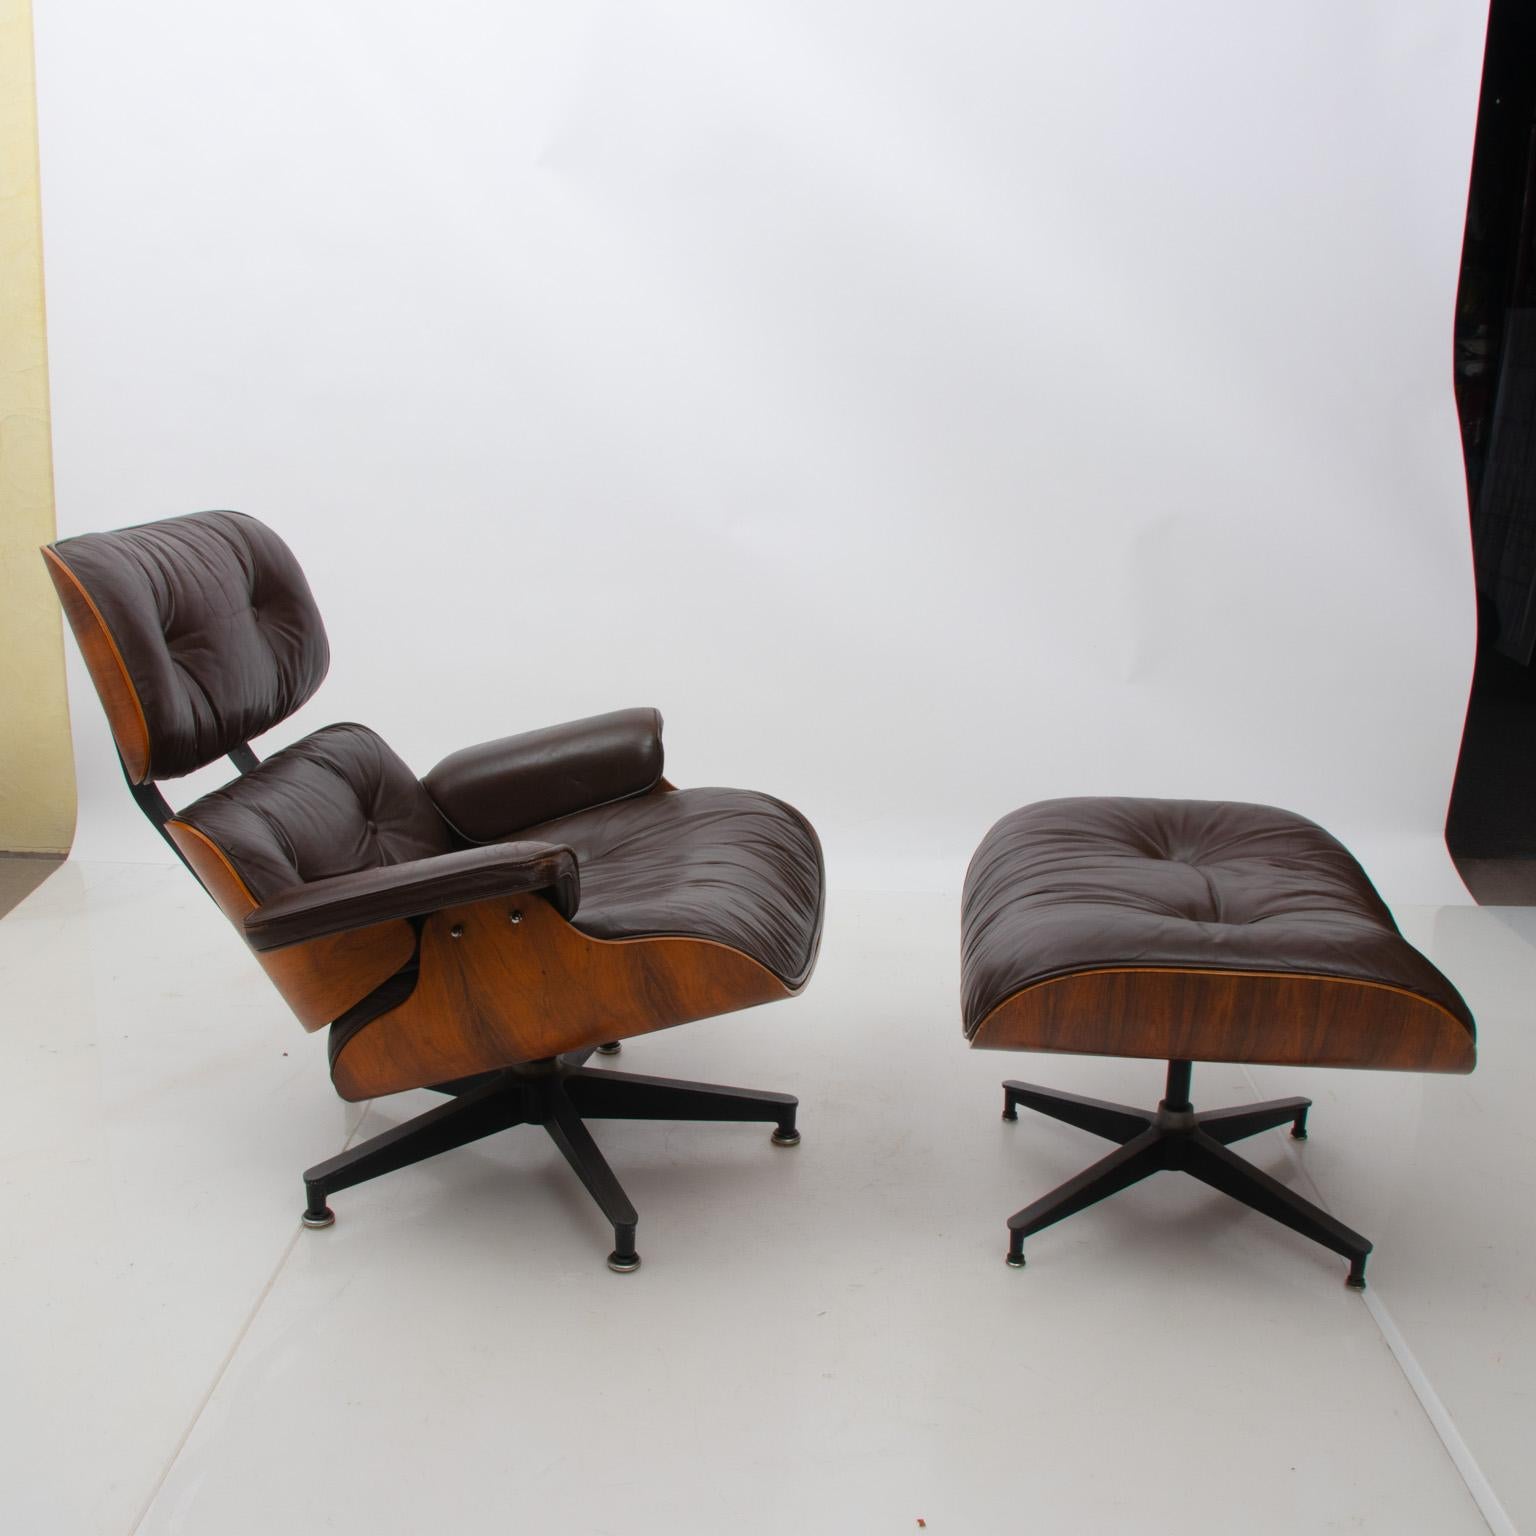 Vintage Eames rosewood upholstered chair and ottoman on aluminum legs, circa 1970s. The pieces also feature chocolate brown leather and tufted buttons. Maker's label is underneath. Please note of wear to consistent with age to the leather upholstery